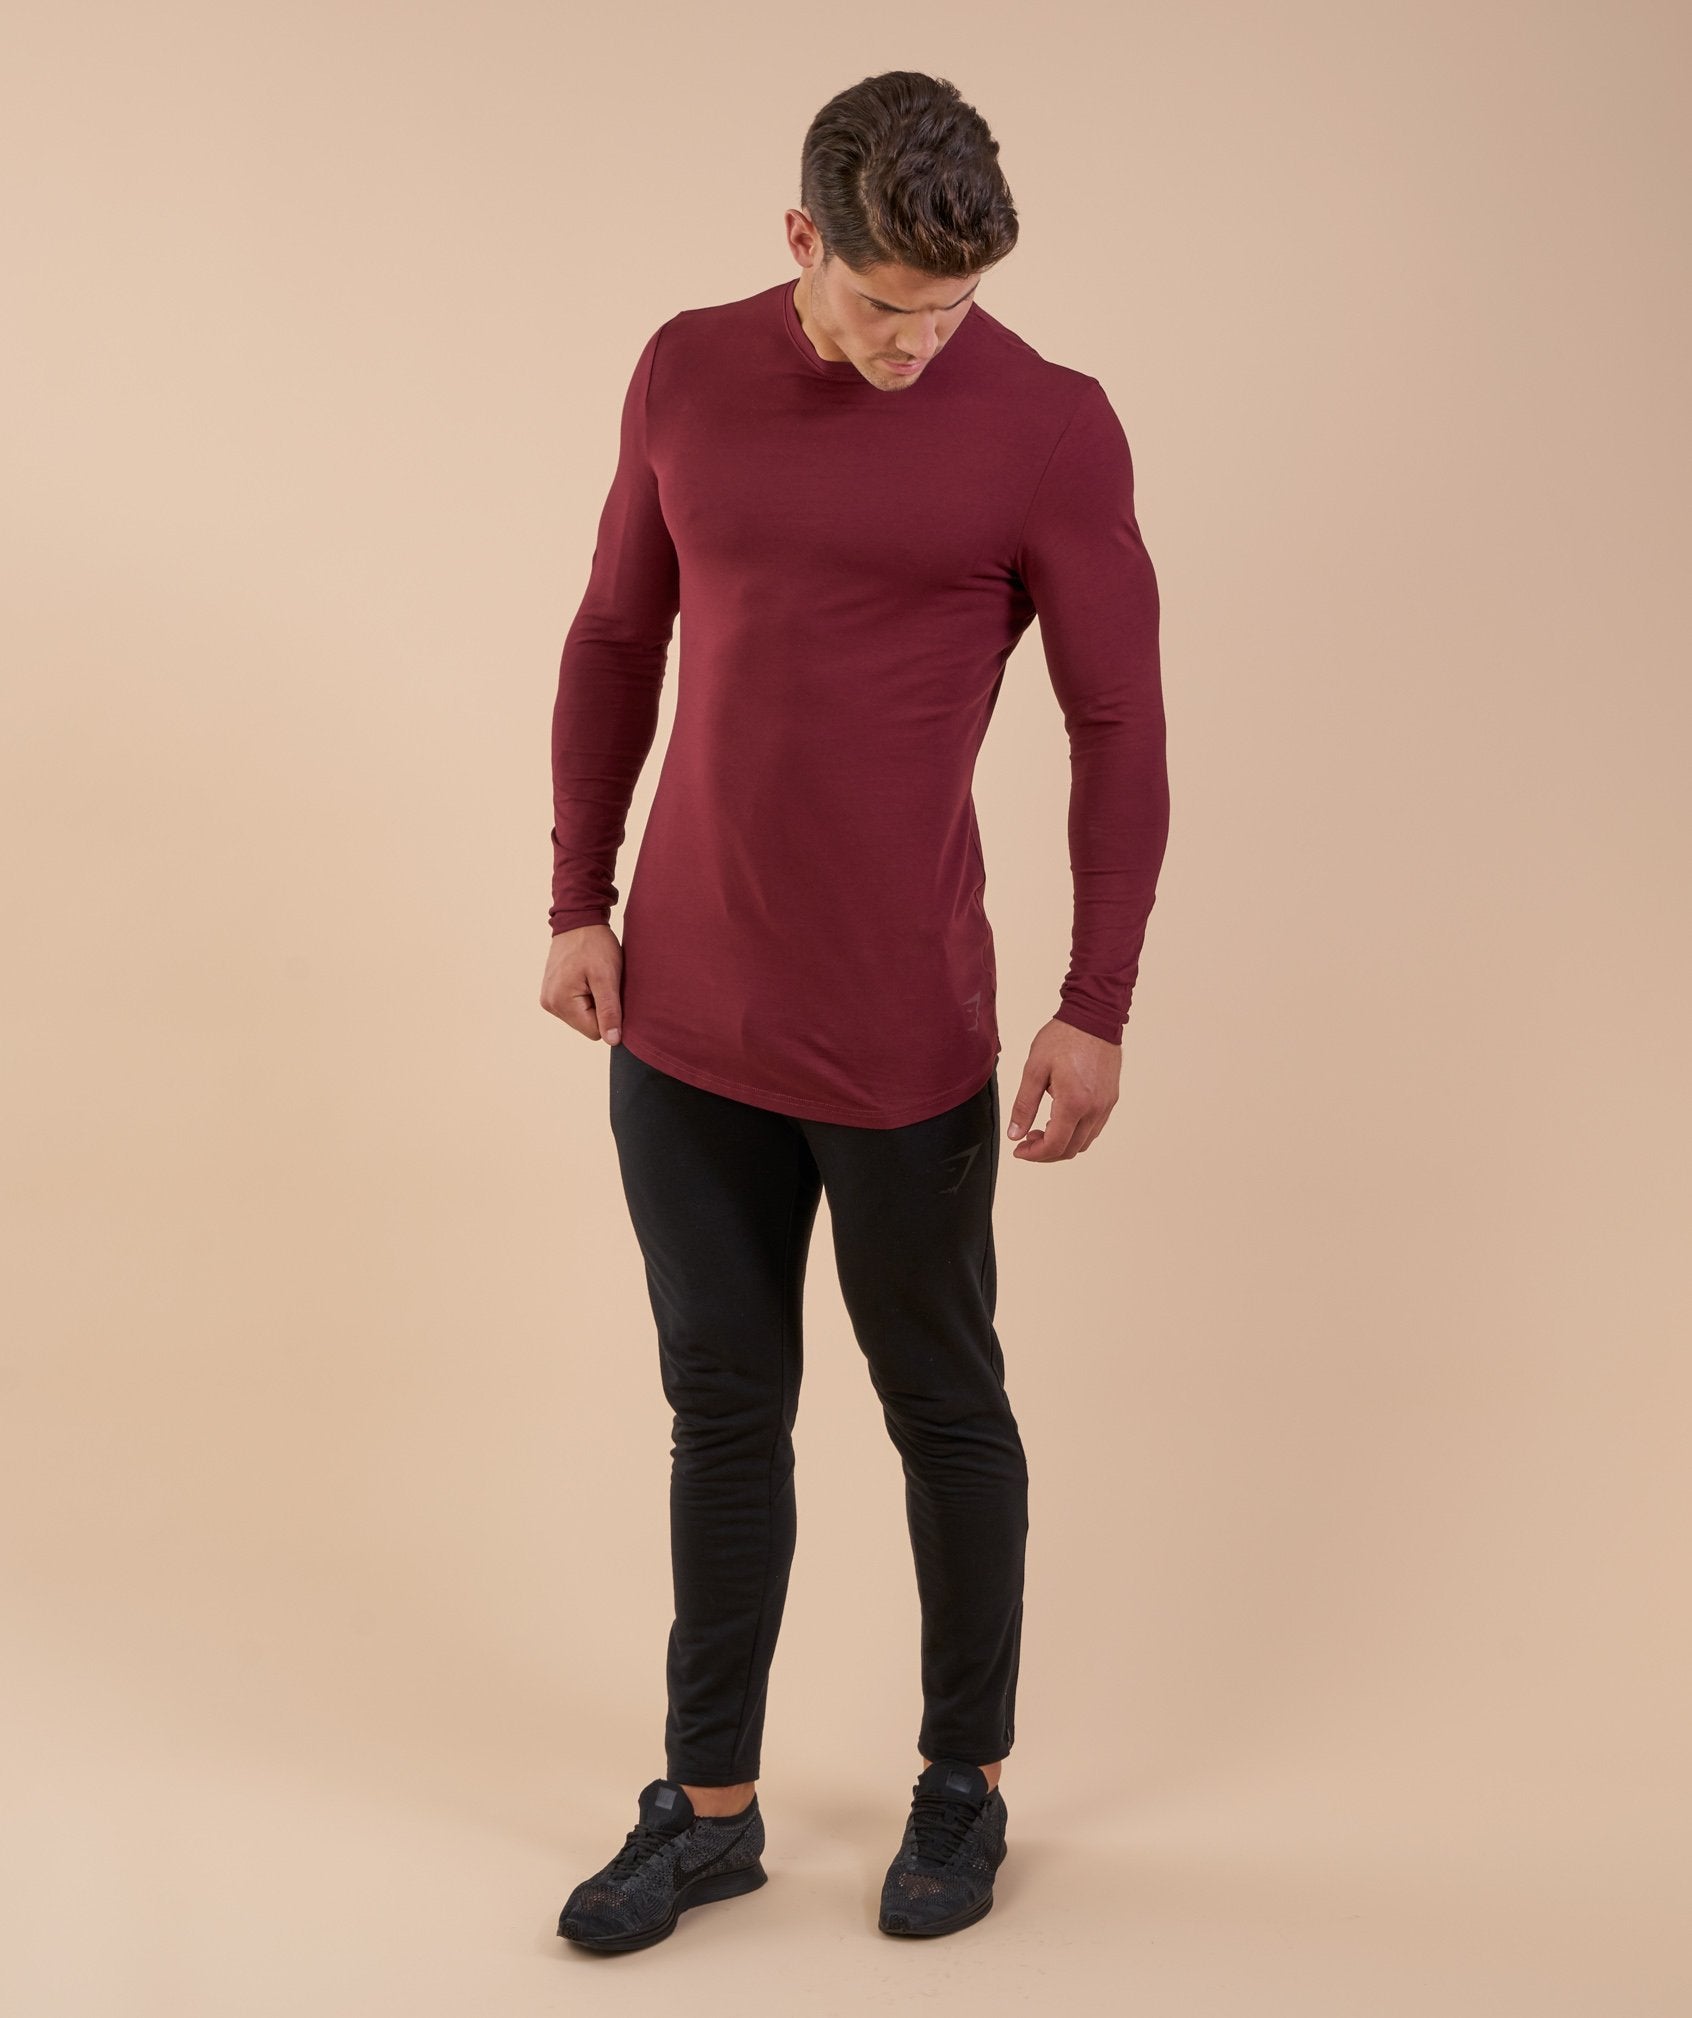 Solace Longline Long Sleeve T-shirt in Port - view 4